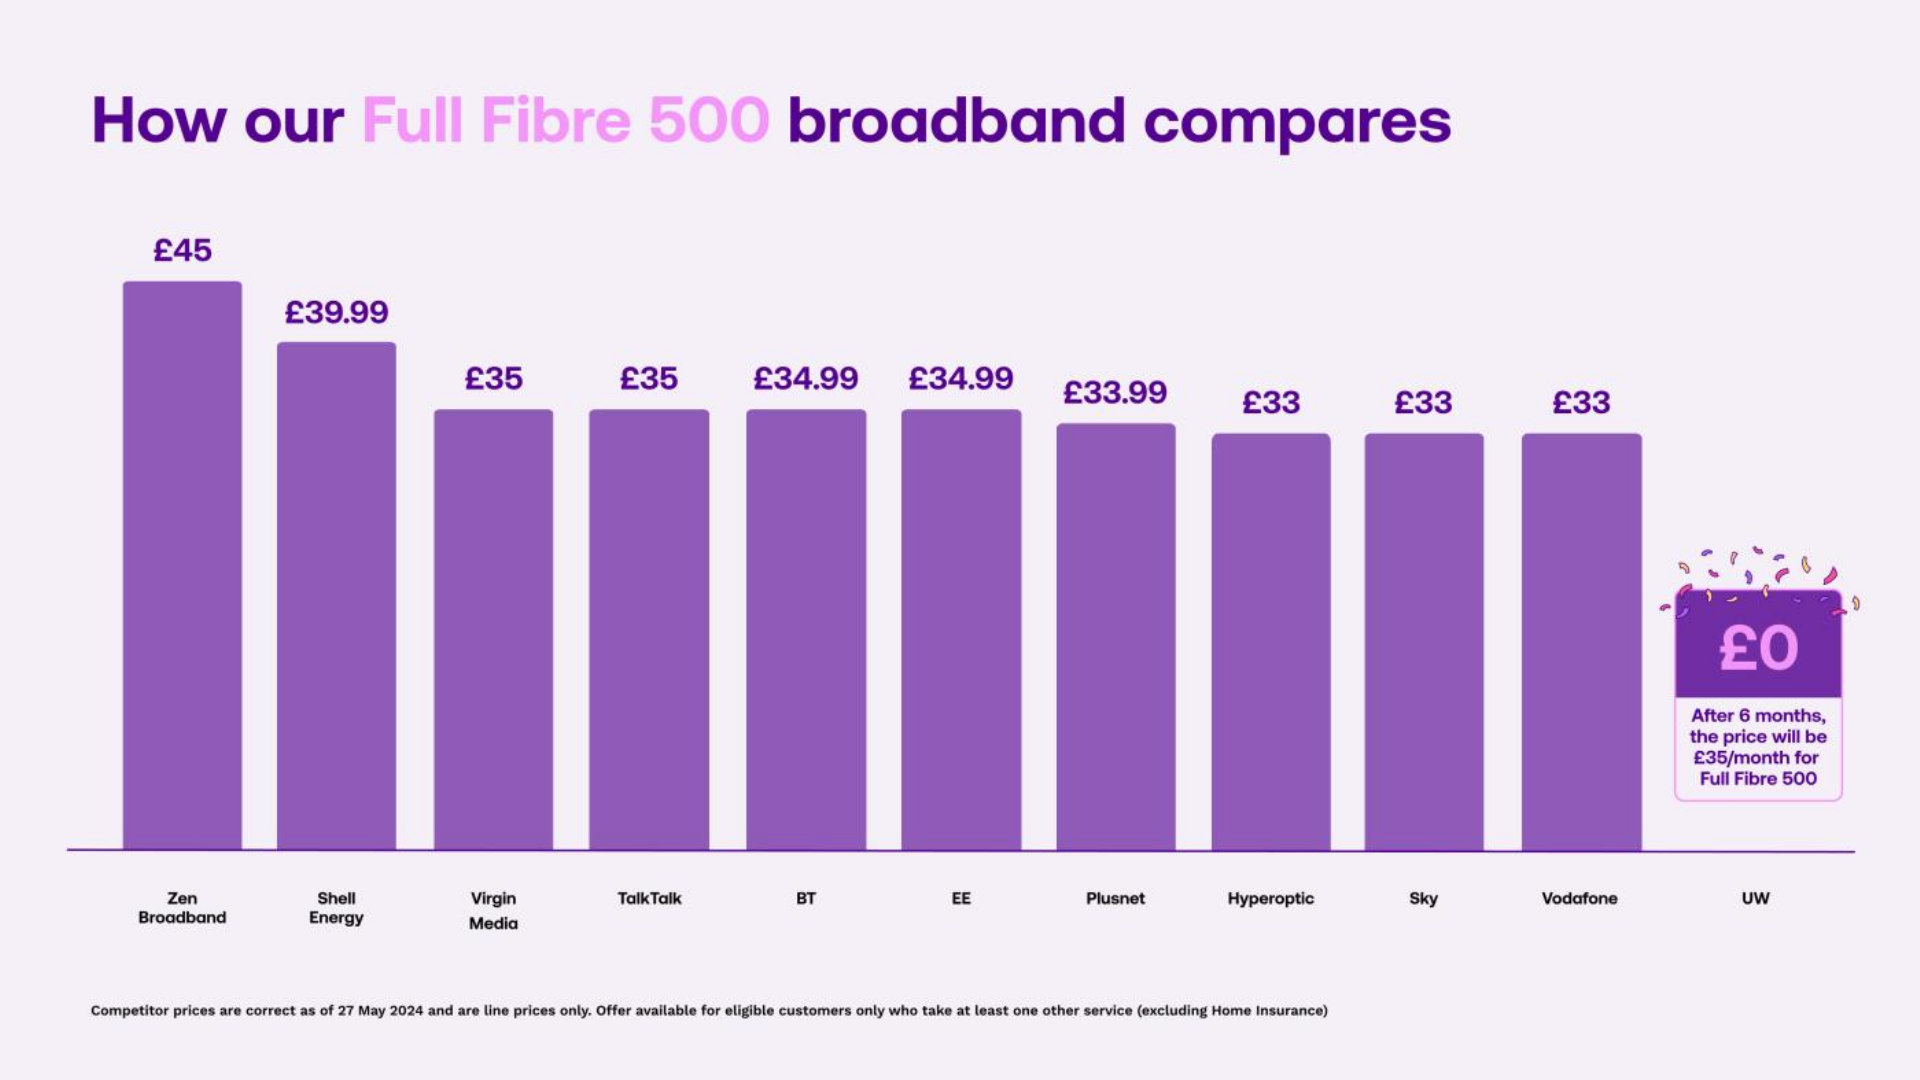 Six months free Full Fibre 500 broadband with Utility Warehouse